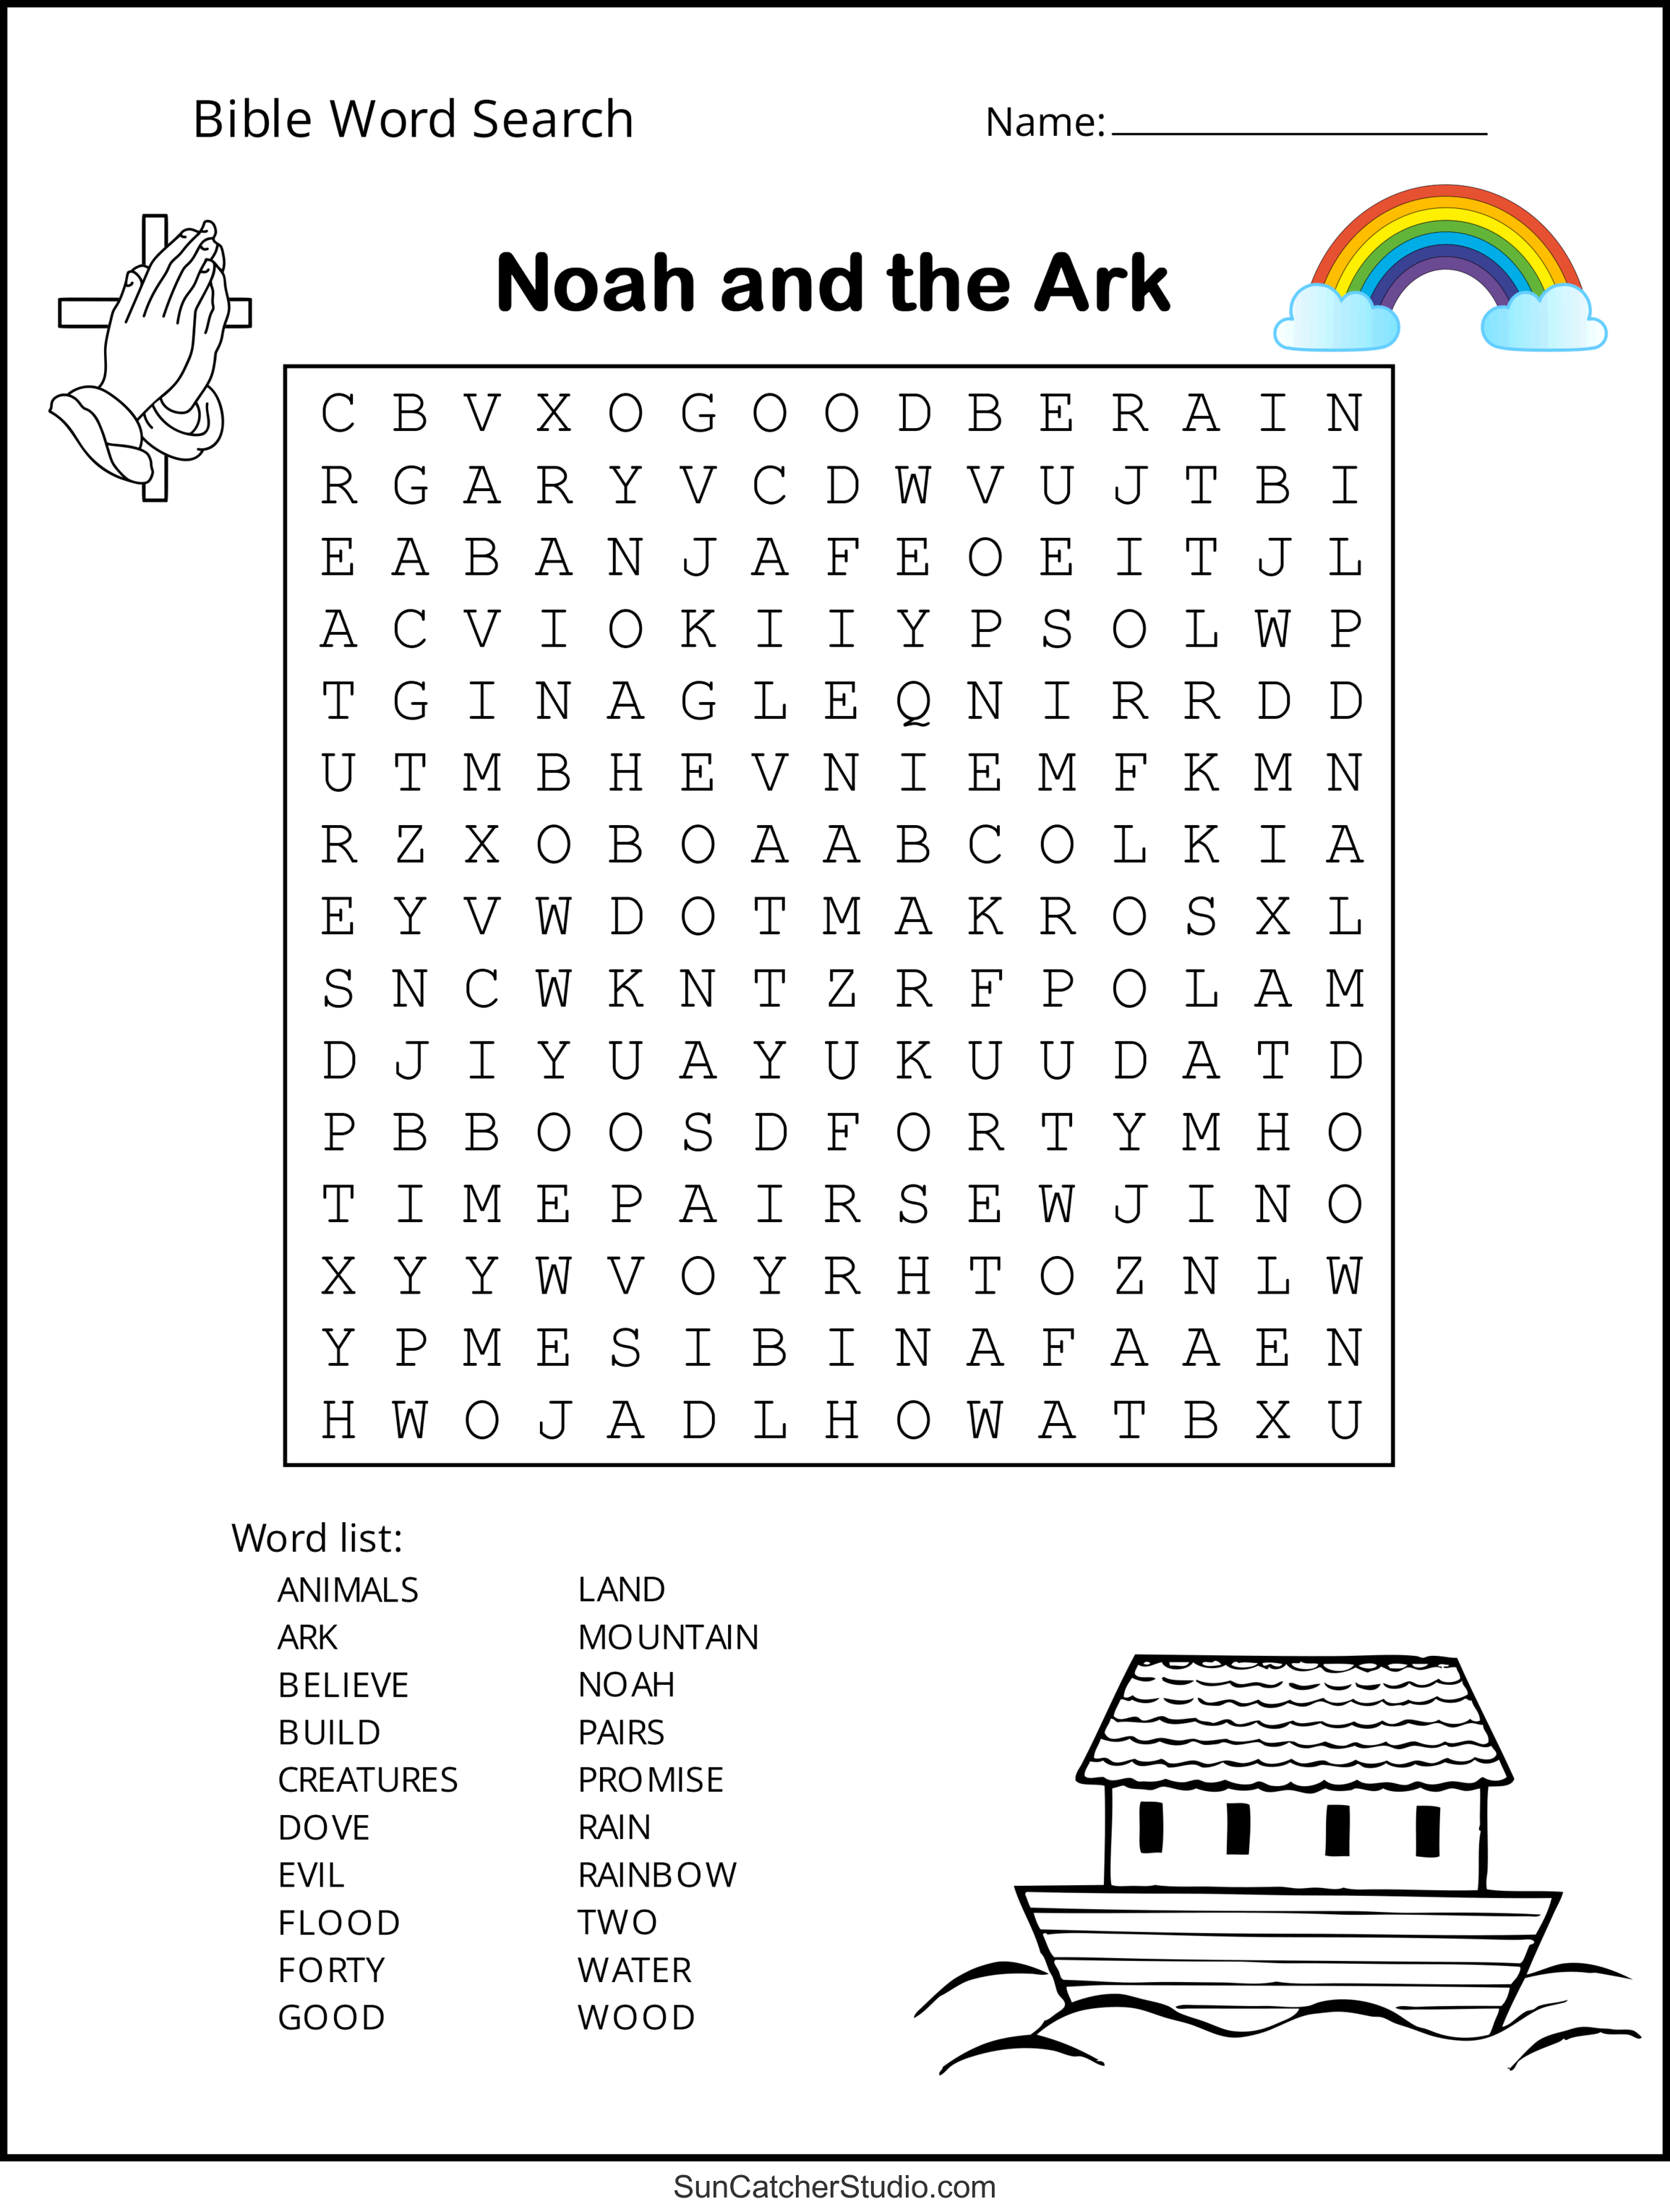 bible-word-search-free-printable-christian-puzzles-diy-projects-patterns-monograms